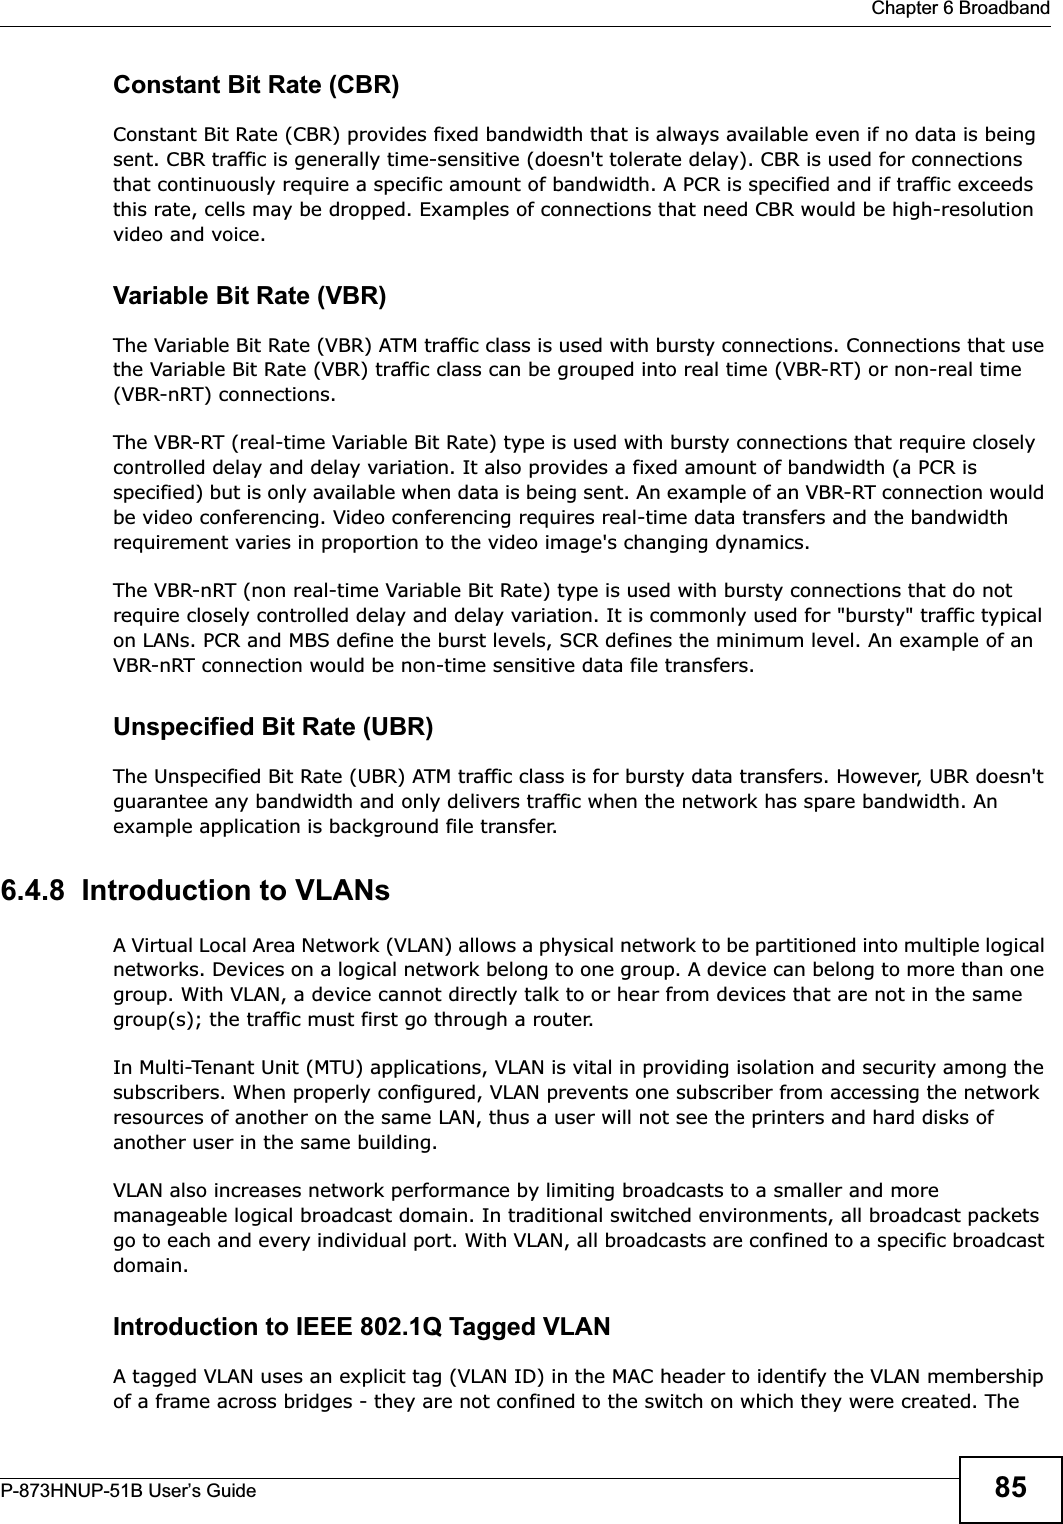  Chapter 6 BroadbandP-873HNUP-51B User’s Guide 85Constant Bit Rate (CBR)Constant Bit Rate (CBR) provides fixed bandwidth that is always available even if no data is being sent. CBR traffic is generally time-sensitive (doesn&apos;t tolerate delay). CBR is used for connections that continuously require a specific amount of bandwidth. A PCR is specified and if traffic exceeds this rate, cells may be dropped. Examples of connections that need CBR would be high-resolution video and voice.Variable Bit Rate (VBR) The Variable Bit Rate (VBR) ATM traffic class is used with bursty connections. Connections that use the Variable Bit Rate (VBR) traffic class can be grouped into real time (VBR-RT) or non-real time (VBR-nRT) connections. The VBR-RT (real-time Variable Bit Rate) type is used with bursty connections that require closely controlled delay and delay variation. It also provides a fixed amount of bandwidth (a PCR is specified) but is only available when data is being sent. An example of an VBR-RT connection would be video conferencing. Video conferencing requires real-time data transfers and the bandwidth requirement varies in proportion to the video image&apos;s changing dynamics. The VBR-nRT (non real-time Variable Bit Rate) type is used with bursty connections that do not require closely controlled delay and delay variation. It is commonly used for &quot;bursty&quot; traffic typical on LANs. PCR and MBS define the burst levels, SCR defines the minimum level. An example of an VBR-nRT connection would be non-time sensitive data file transfers.Unspecified Bit Rate (UBR)The Unspecified Bit Rate (UBR) ATM traffic class is for bursty data transfers. However, UBR doesn&apos;t guarantee any bandwidth and only delivers traffic when the network has spare bandwidth. An example application is background file transfer.6.4.8  Introduction to VLANs A Virtual Local Area Network (VLAN) allows a physical network to be partitioned into multiple logical networks. Devices on a logical network belong to one group. A device can belong to more than one group. With VLAN, a device cannot directly talk to or hear from devices that are not in the same group(s); the traffic must first go through a router.In Multi-Tenant Unit (MTU) applications, VLAN is vital in providing isolation and security among the subscribers. When properly configured, VLAN prevents one subscriber from accessing the network resources of another on the same LAN, thus a user will not see the printers and hard disks of another user in the same building. VLAN also increases network performance by limiting broadcasts to a smaller and more manageable logical broadcast domain. In traditional switched environments, all broadcast packets go to each and every individual port. With VLAN, all broadcasts are confined to a specific broadcast domain.Introduction to IEEE 802.1Q Tagged VLAN A tagged VLAN uses an explicit tag (VLAN ID) in the MAC header to identify the VLAN membership of a frame across bridges - they are not confined to the switch on which they were created. The 